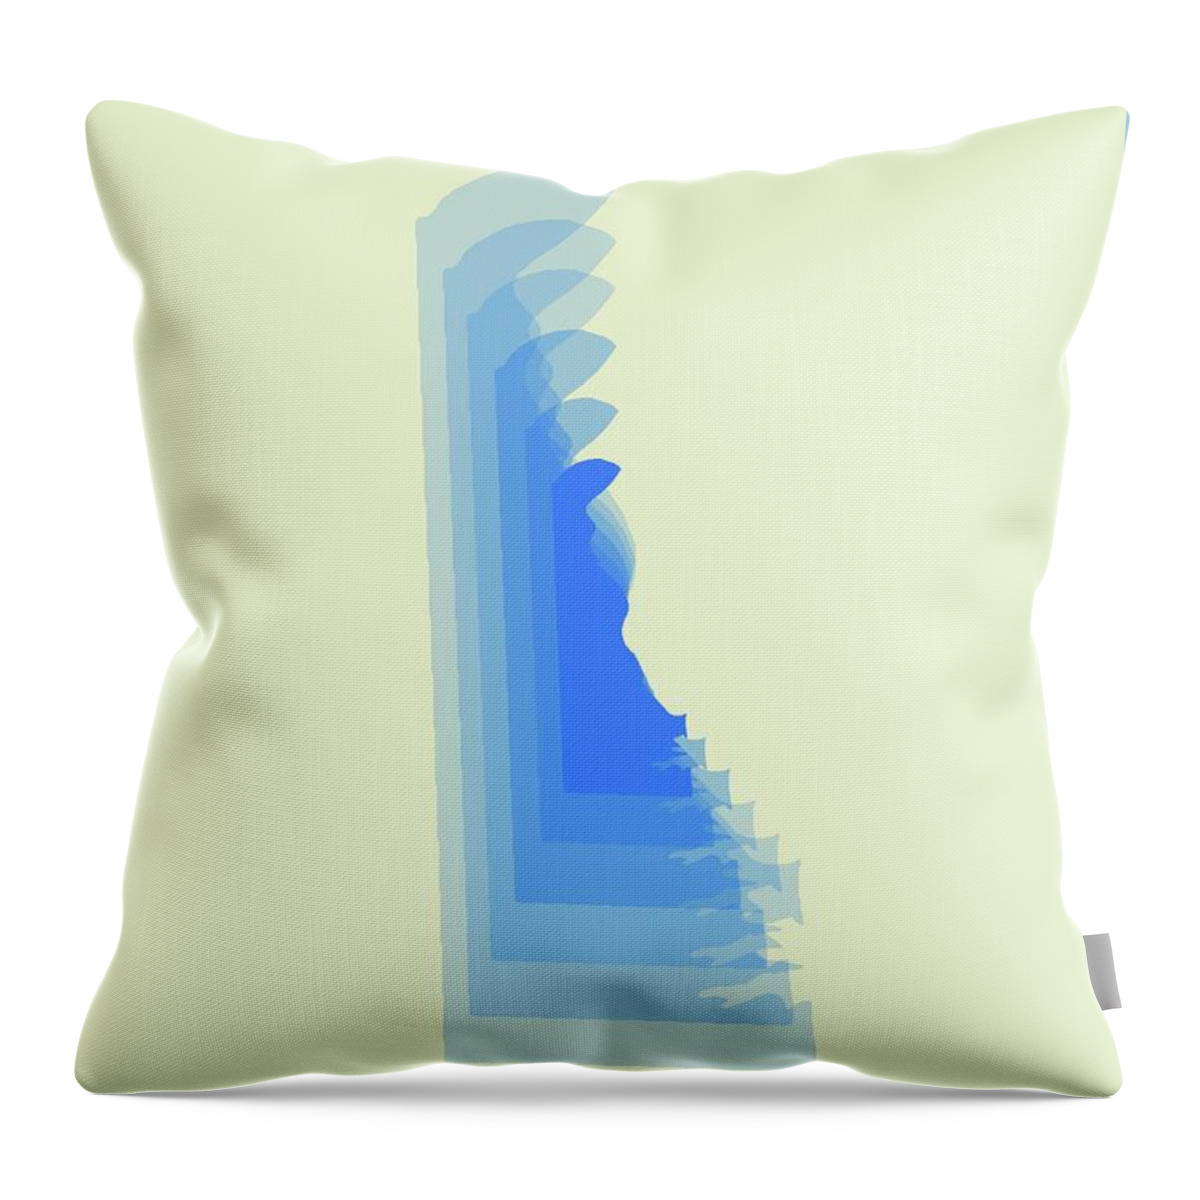 Delaware Throw Pillow featuring the digital art Map of Delaware by Naxart Studio